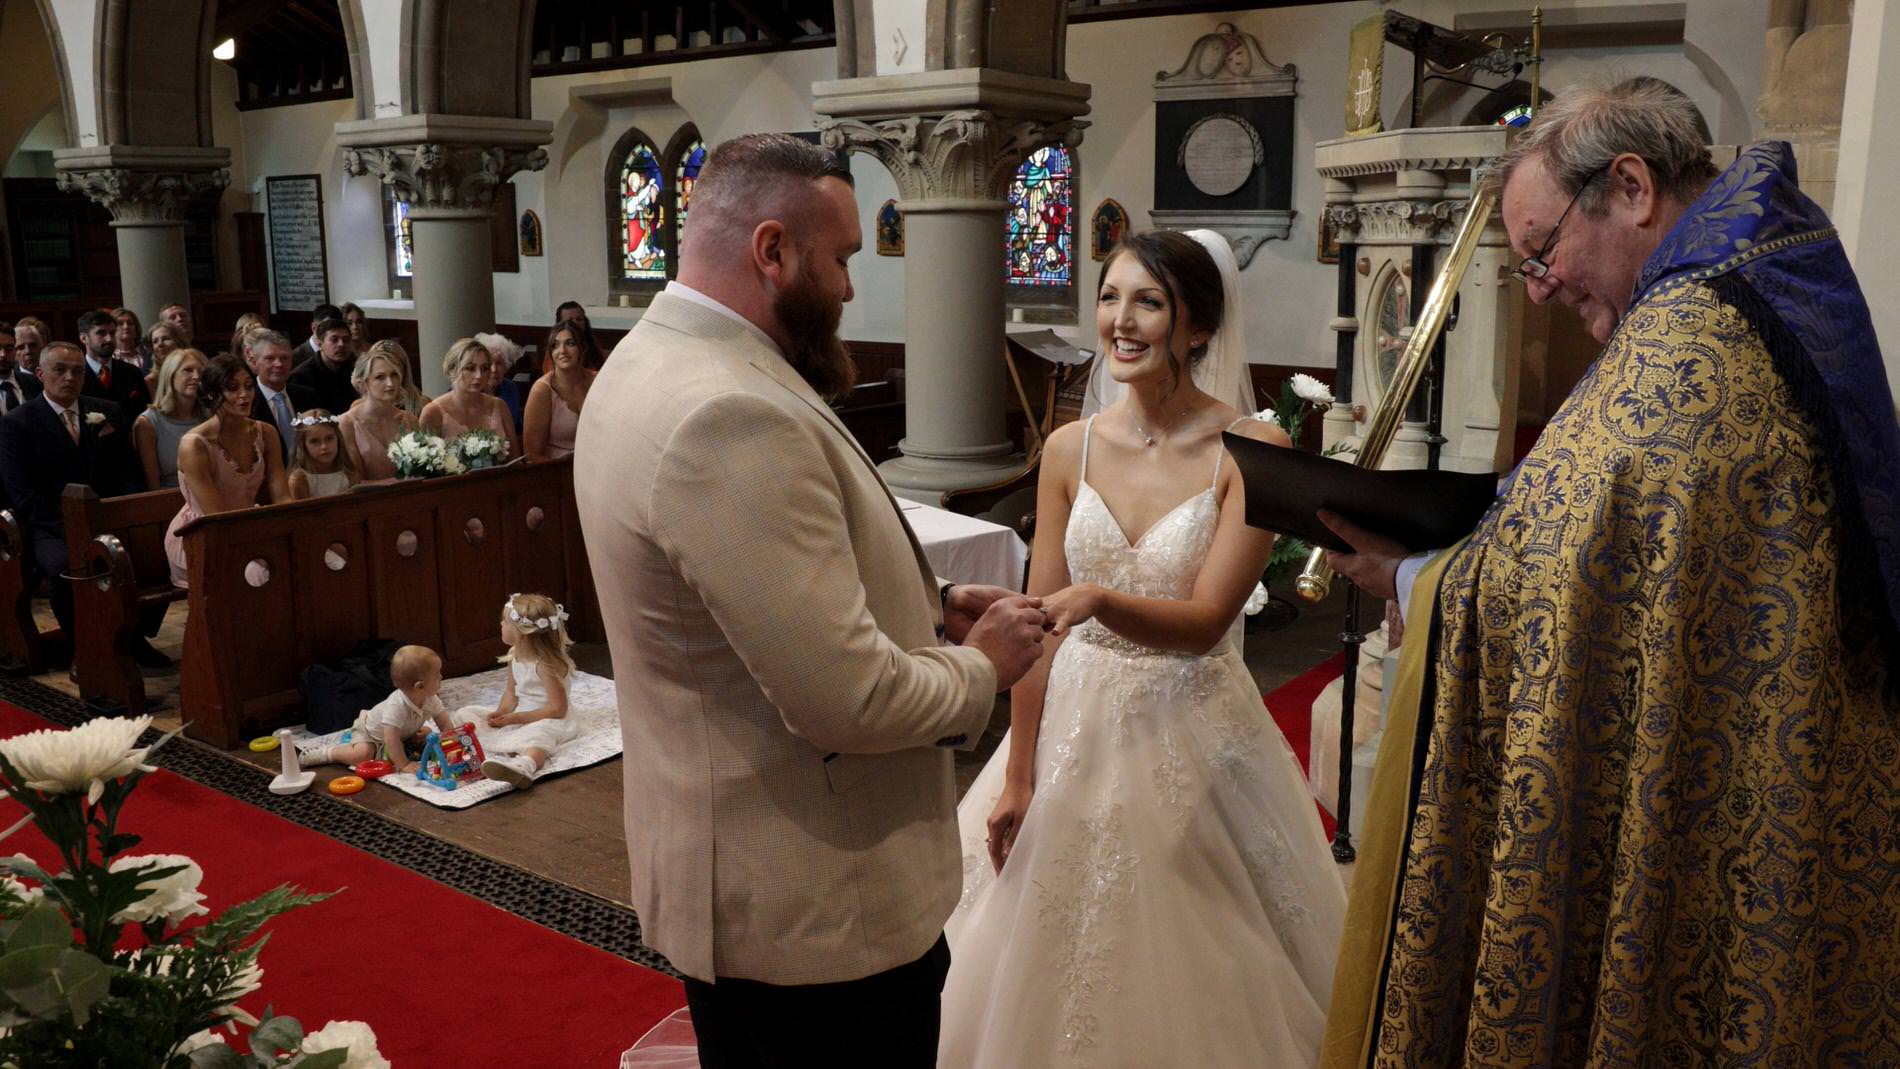 exchanging wedding rings at st mary the virgin church in rufford